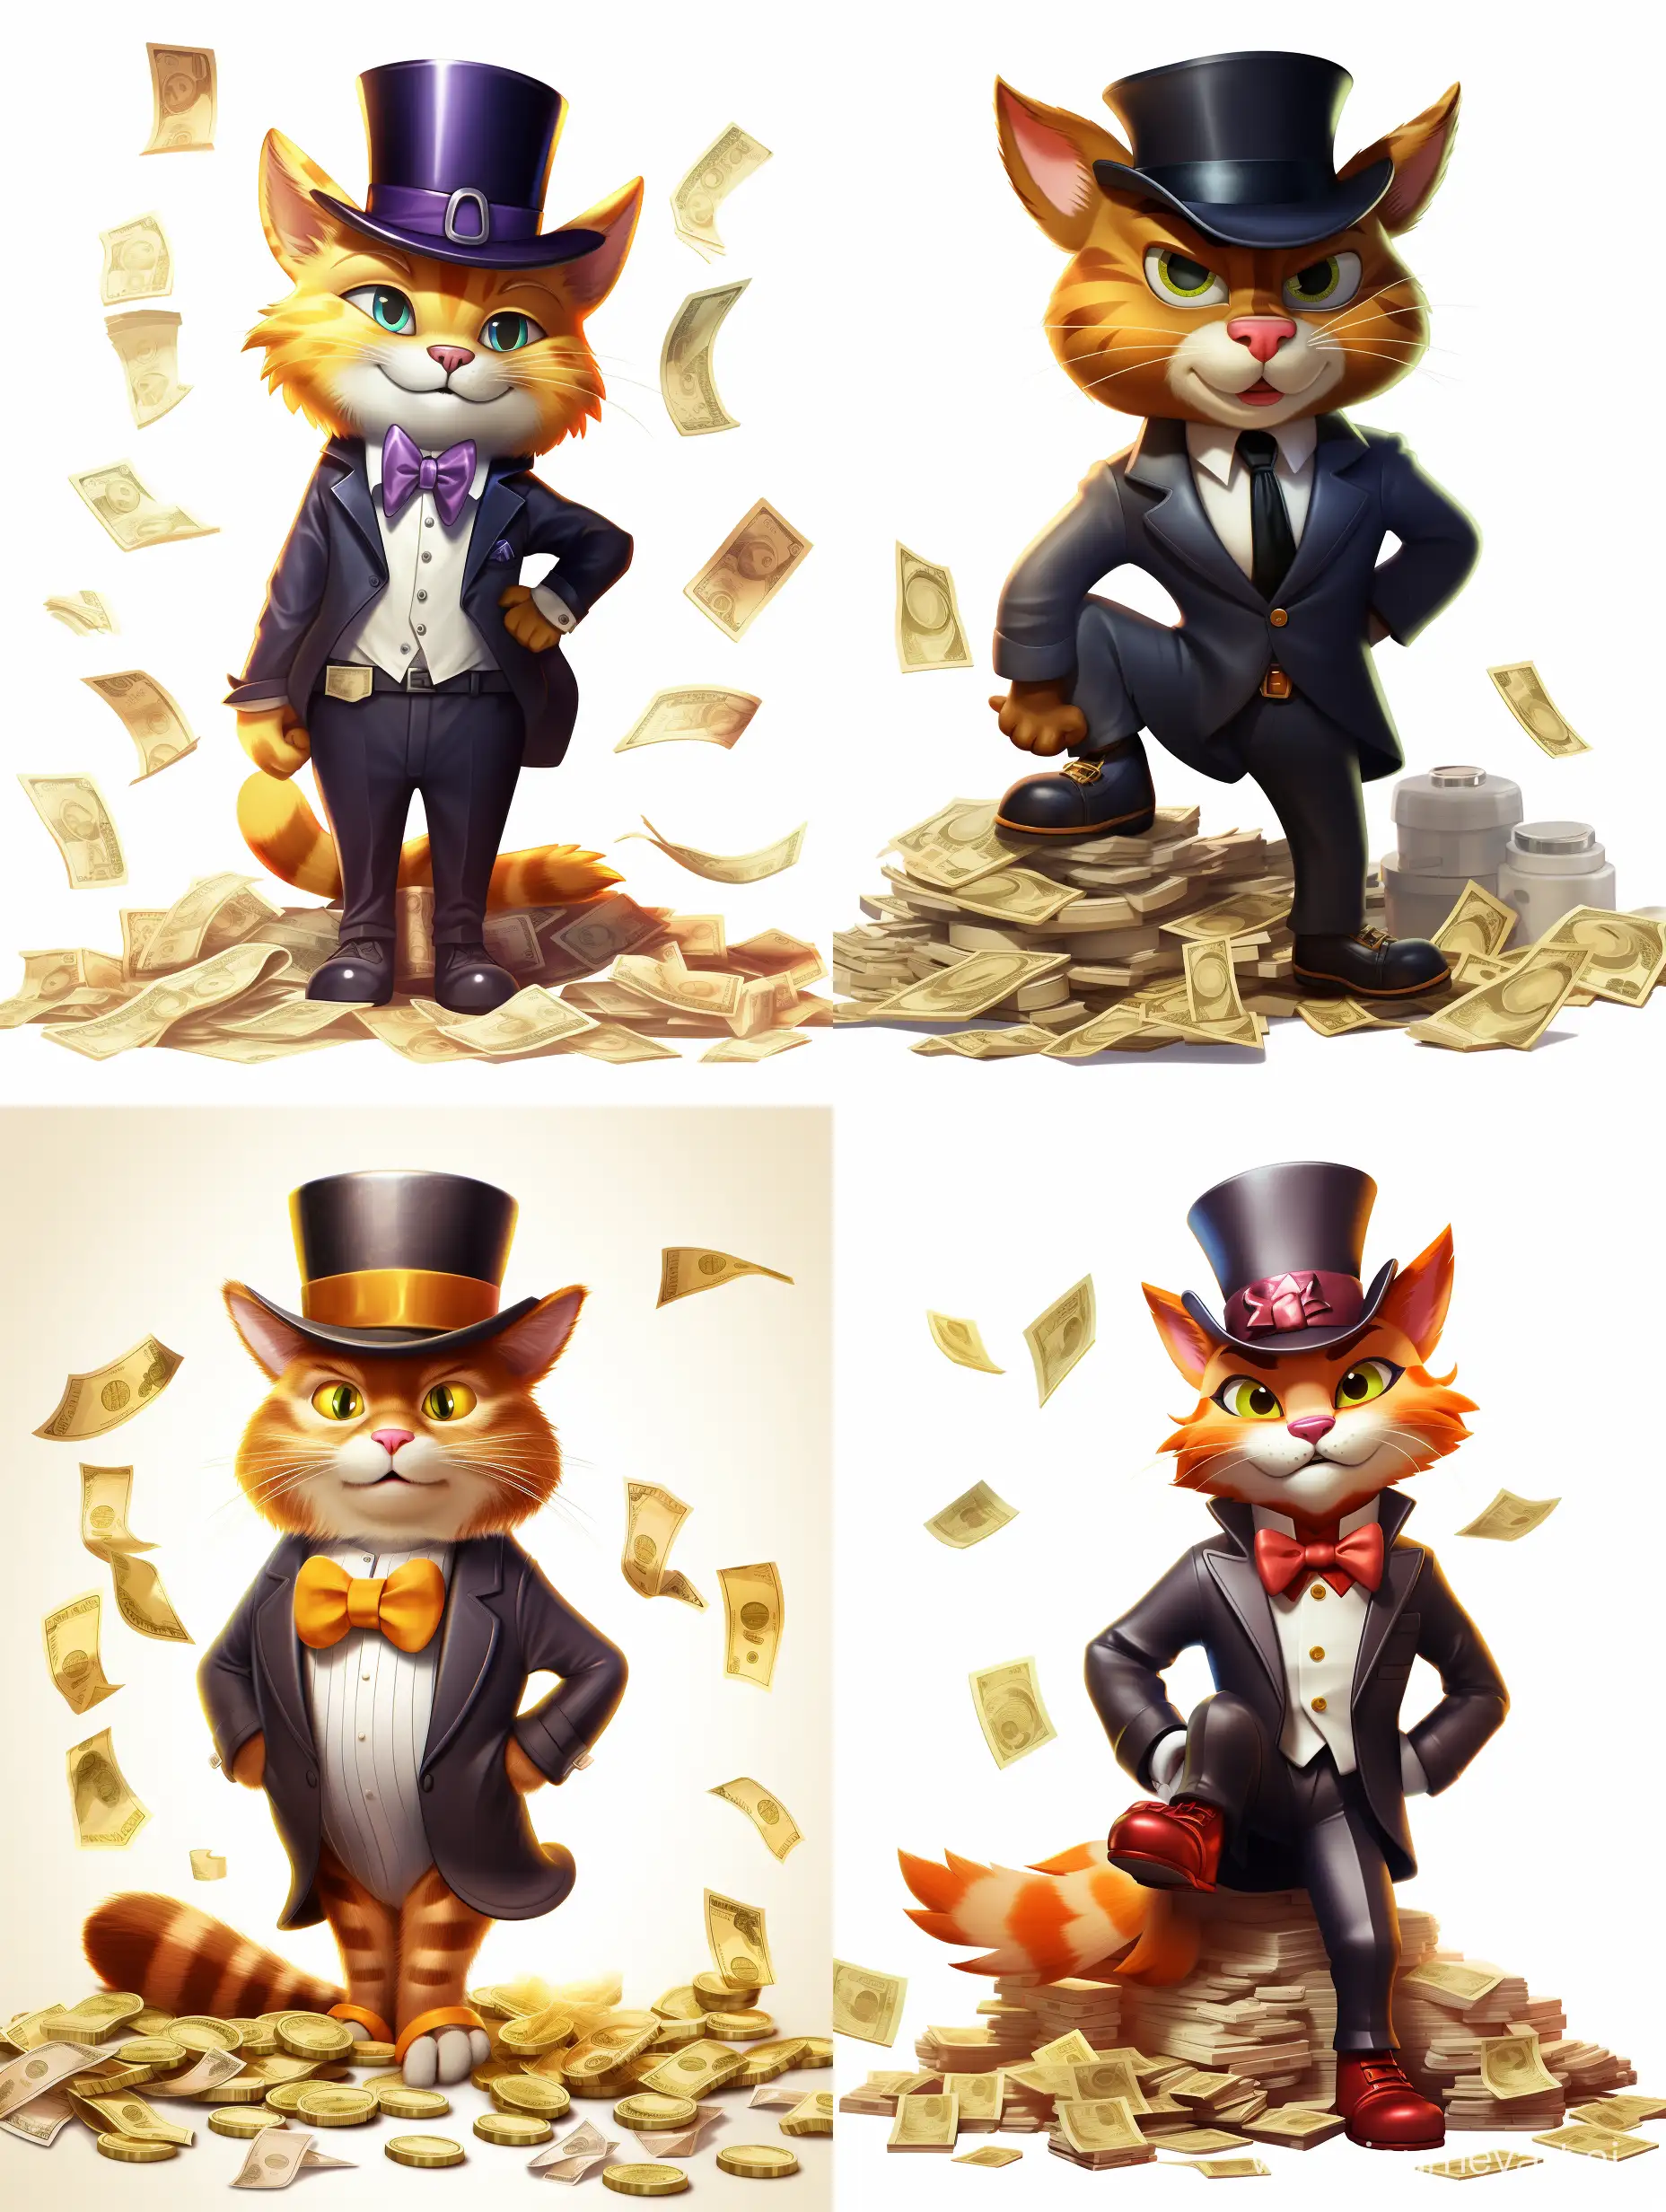 Wealthy-Cat-in-Stylish-Attire-Tossing-Coins-and-Money